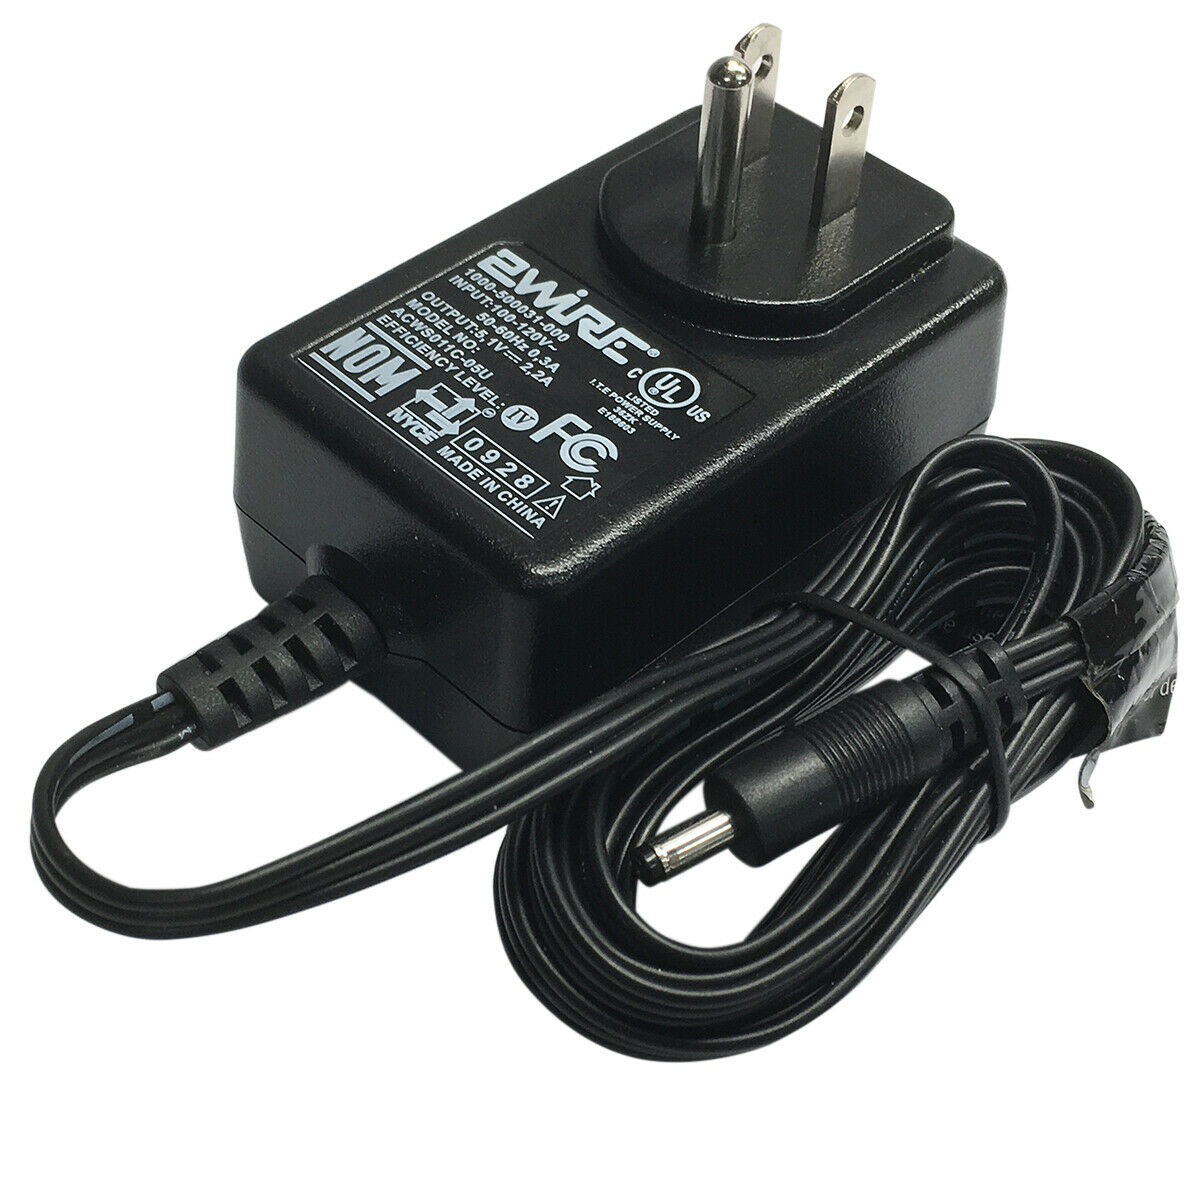 New 5.1V 2.2A 2Wire ACWS011C-05U Power Supply AC ADAPTER for AT&T Modem - Click Image to Close